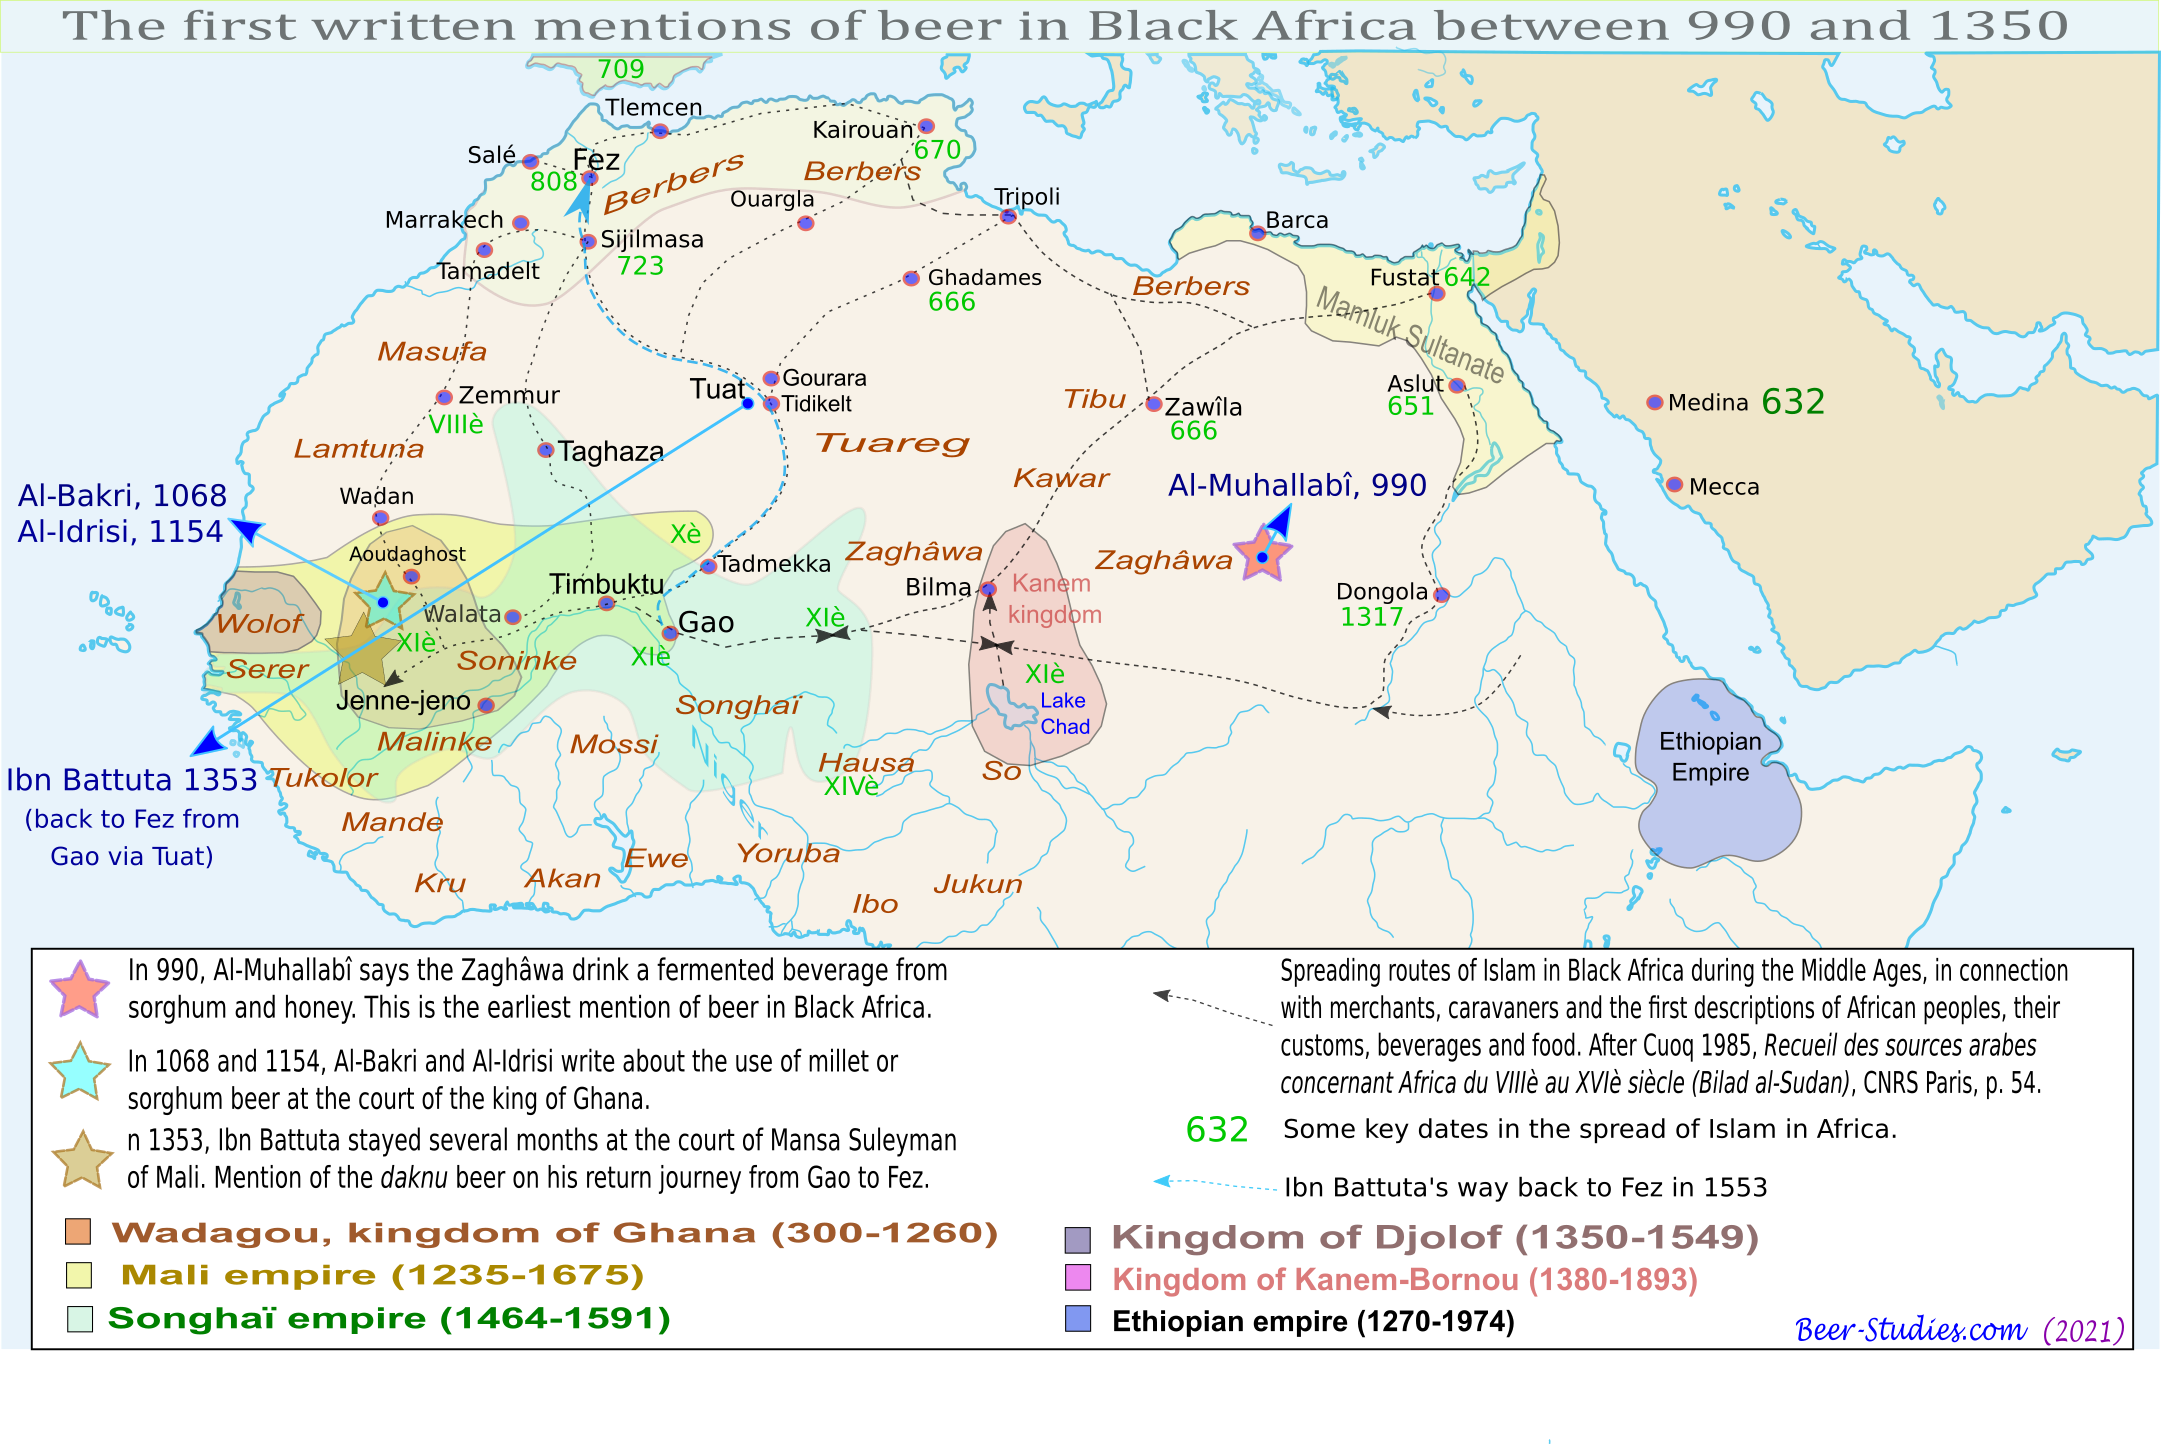 First mentions of beer in medieval Black Africa